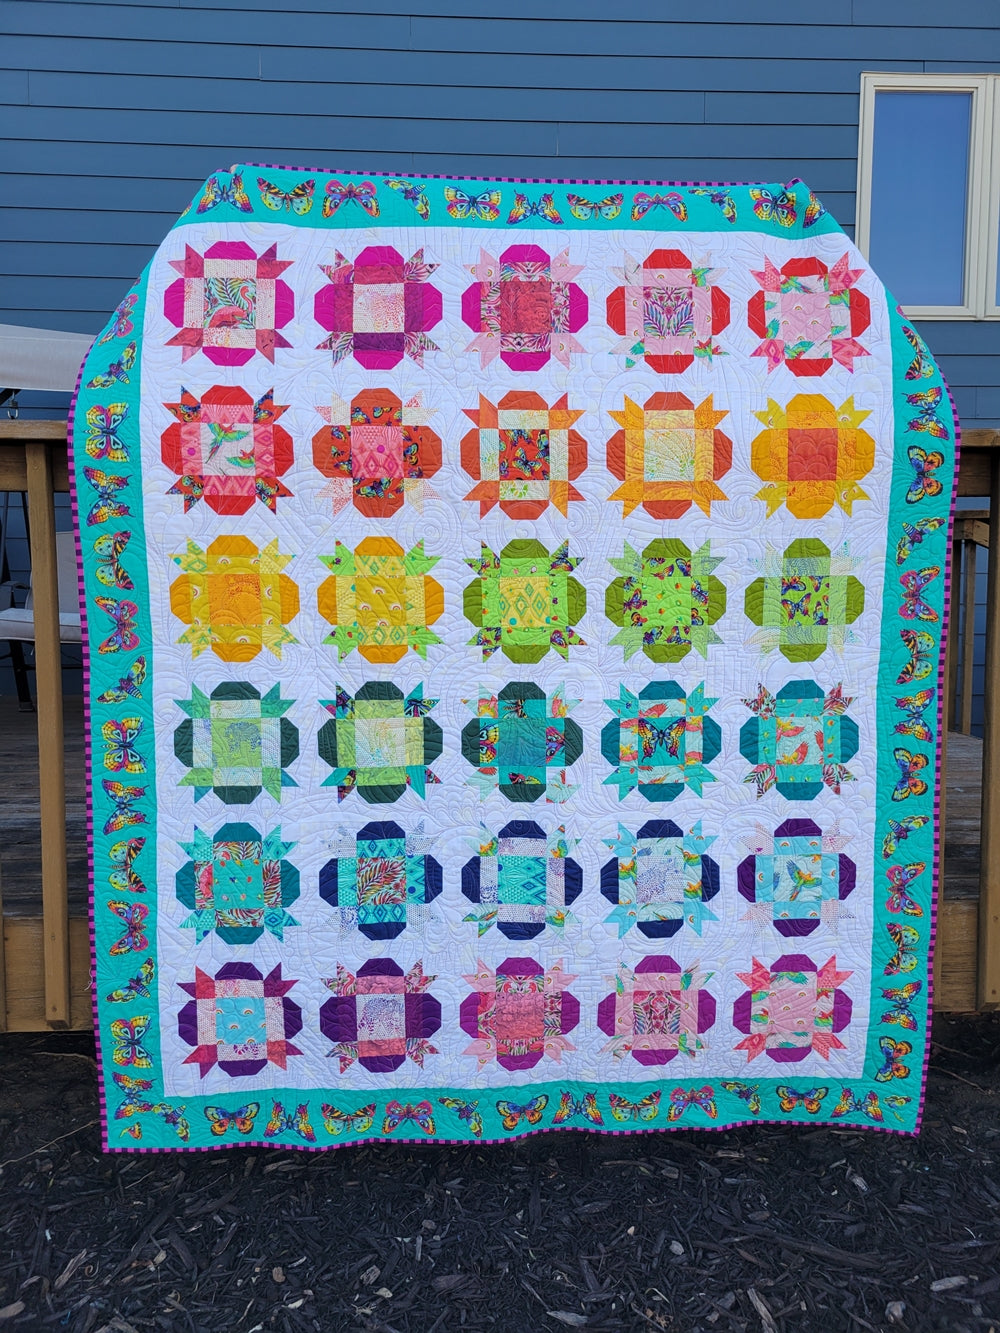 Tula Pink Butterfly Quilt - Sew Sweetness